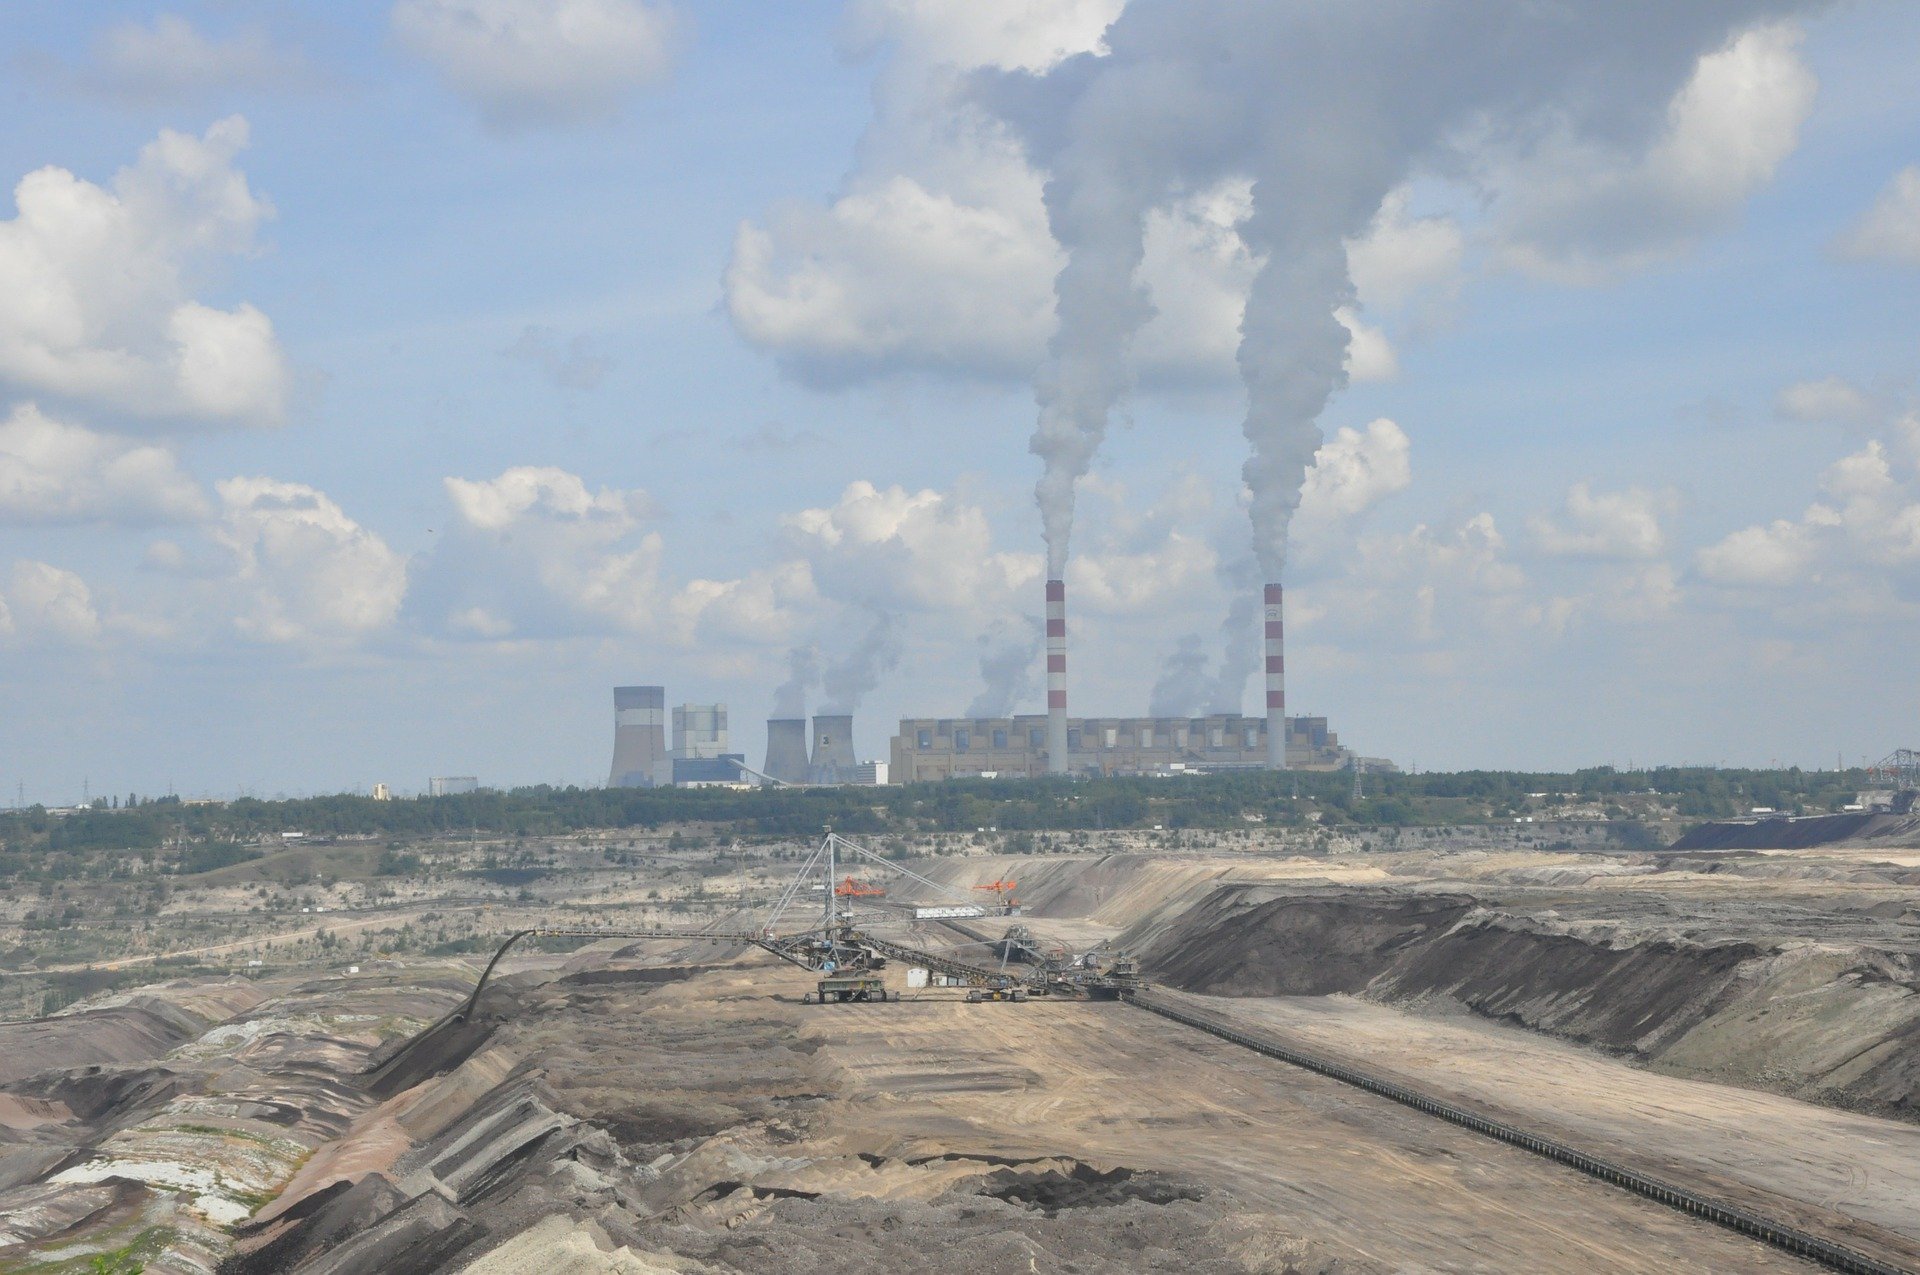 Poland must quit its coal addiction, or nothing will come of Europe's climate plans